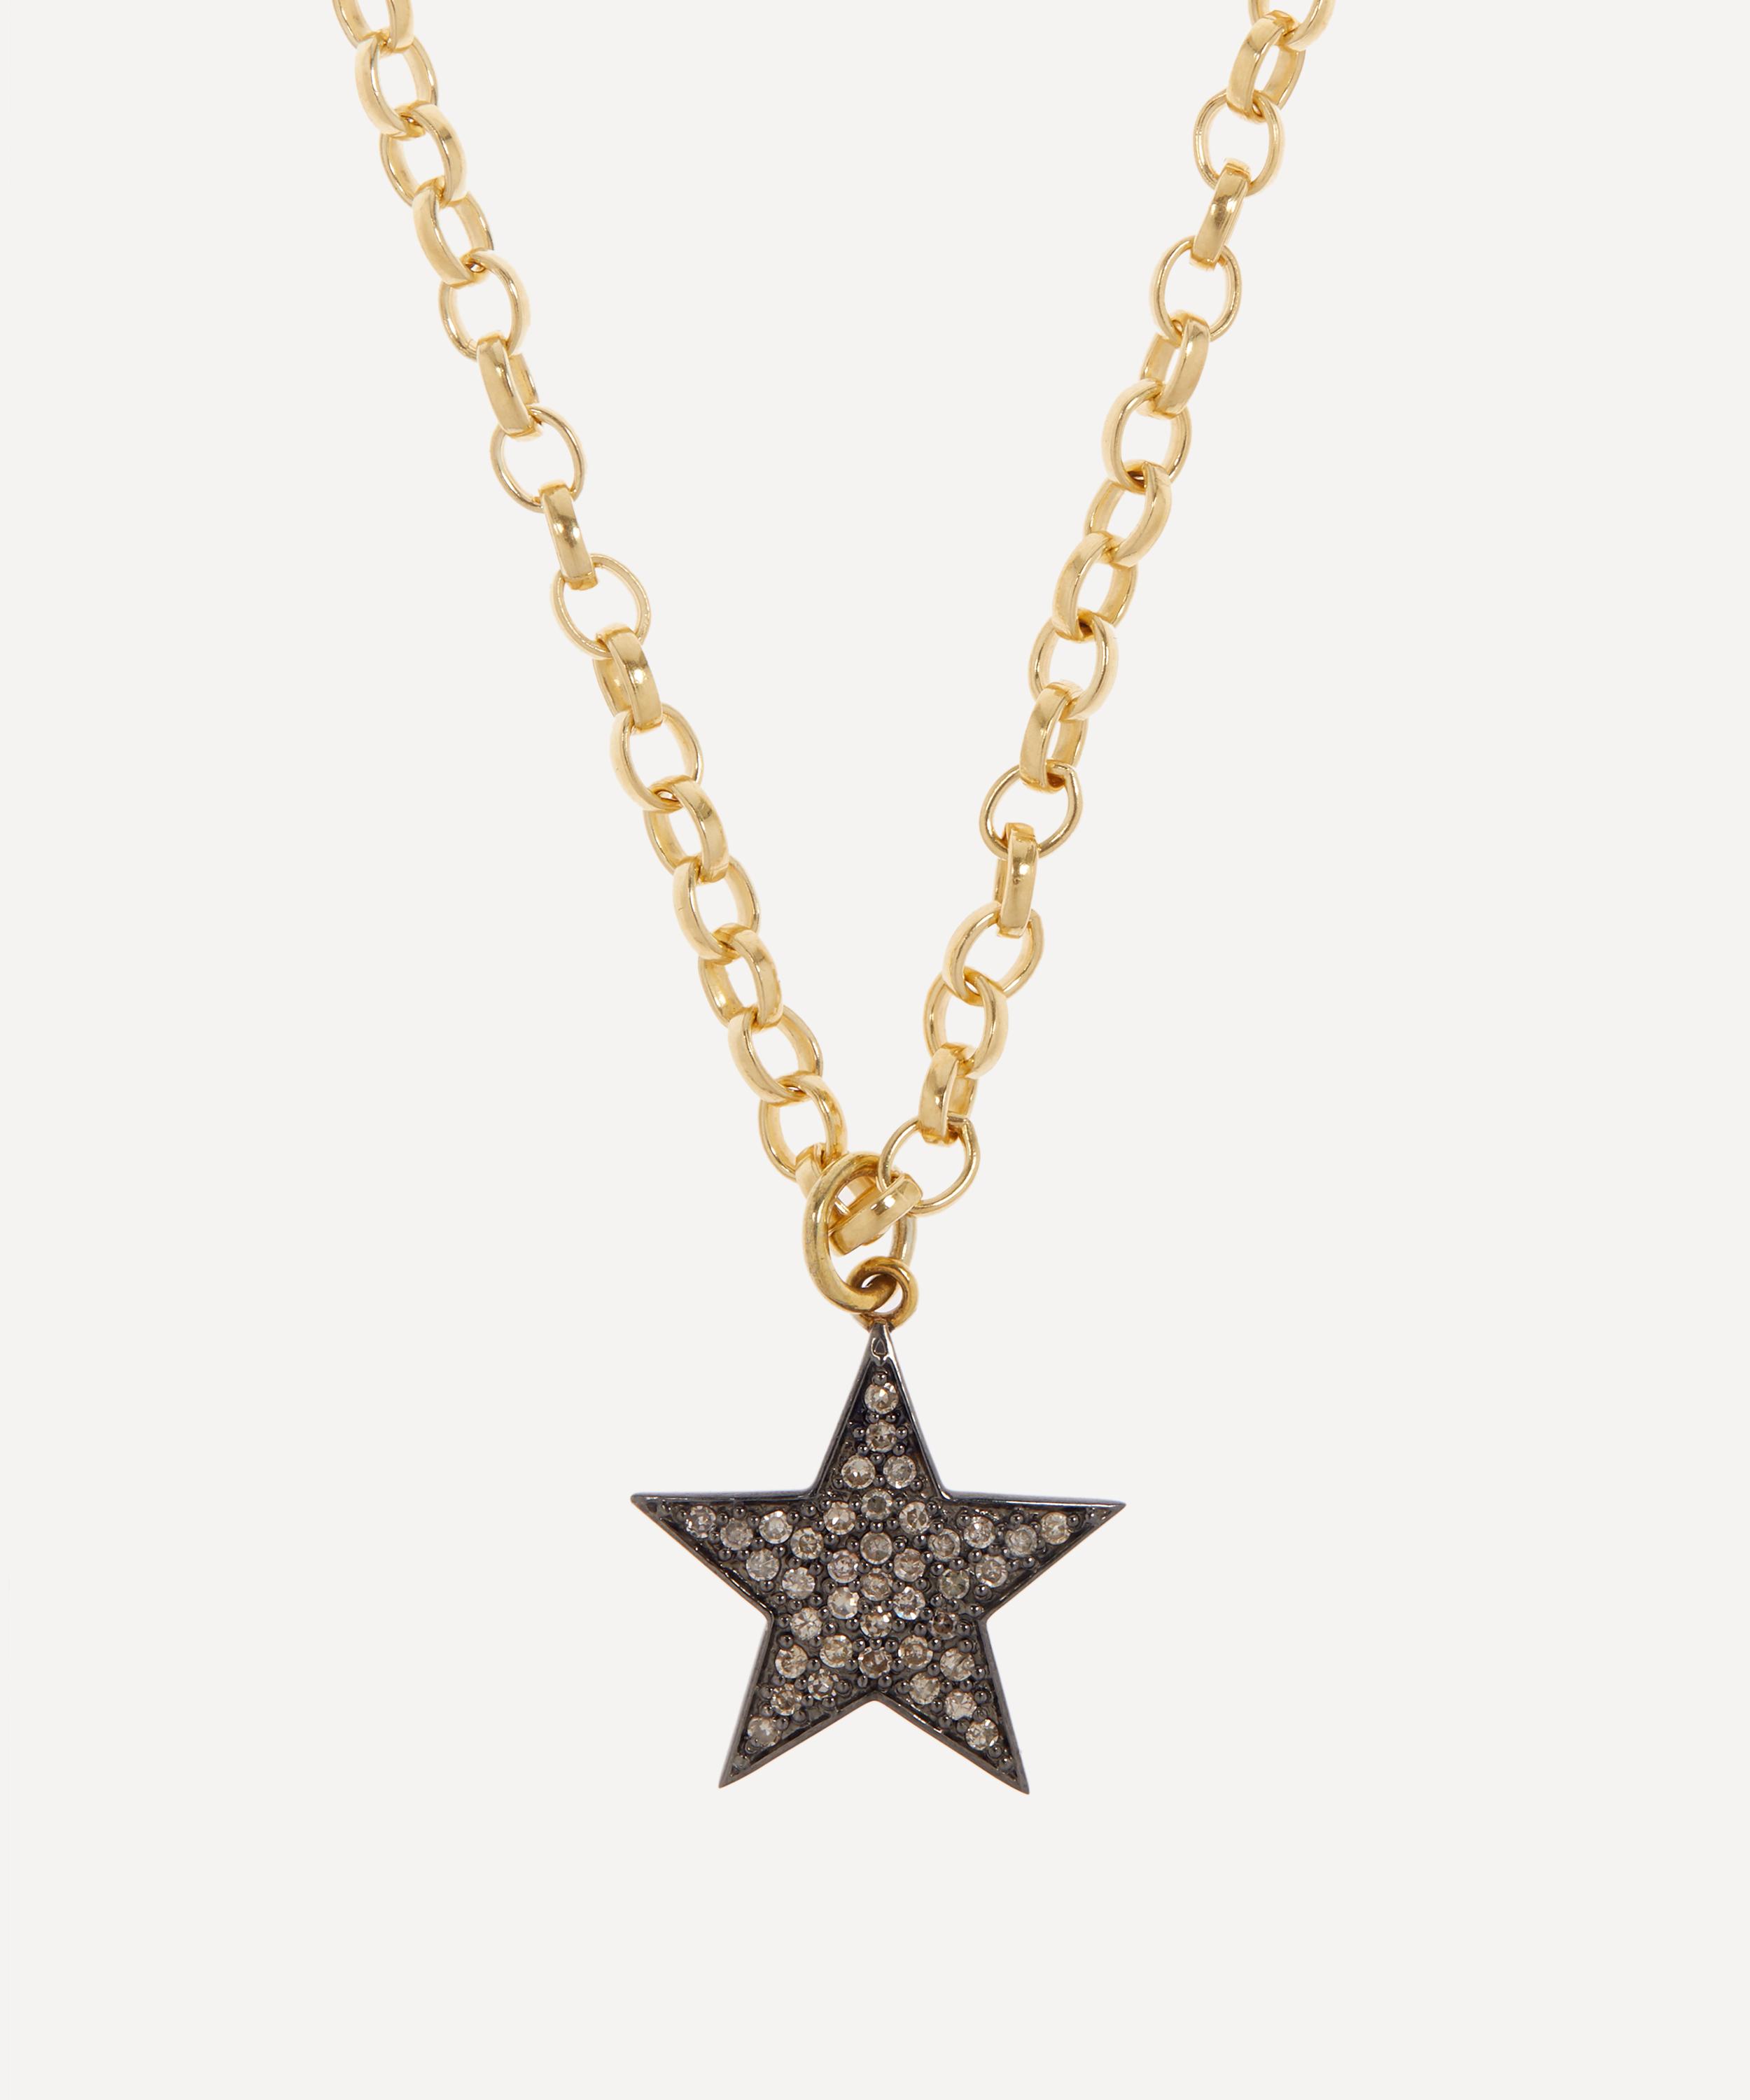 Kirstie Le Marque 9ct Gold-plated Diamond Chunky Star Pendant Necklace ...